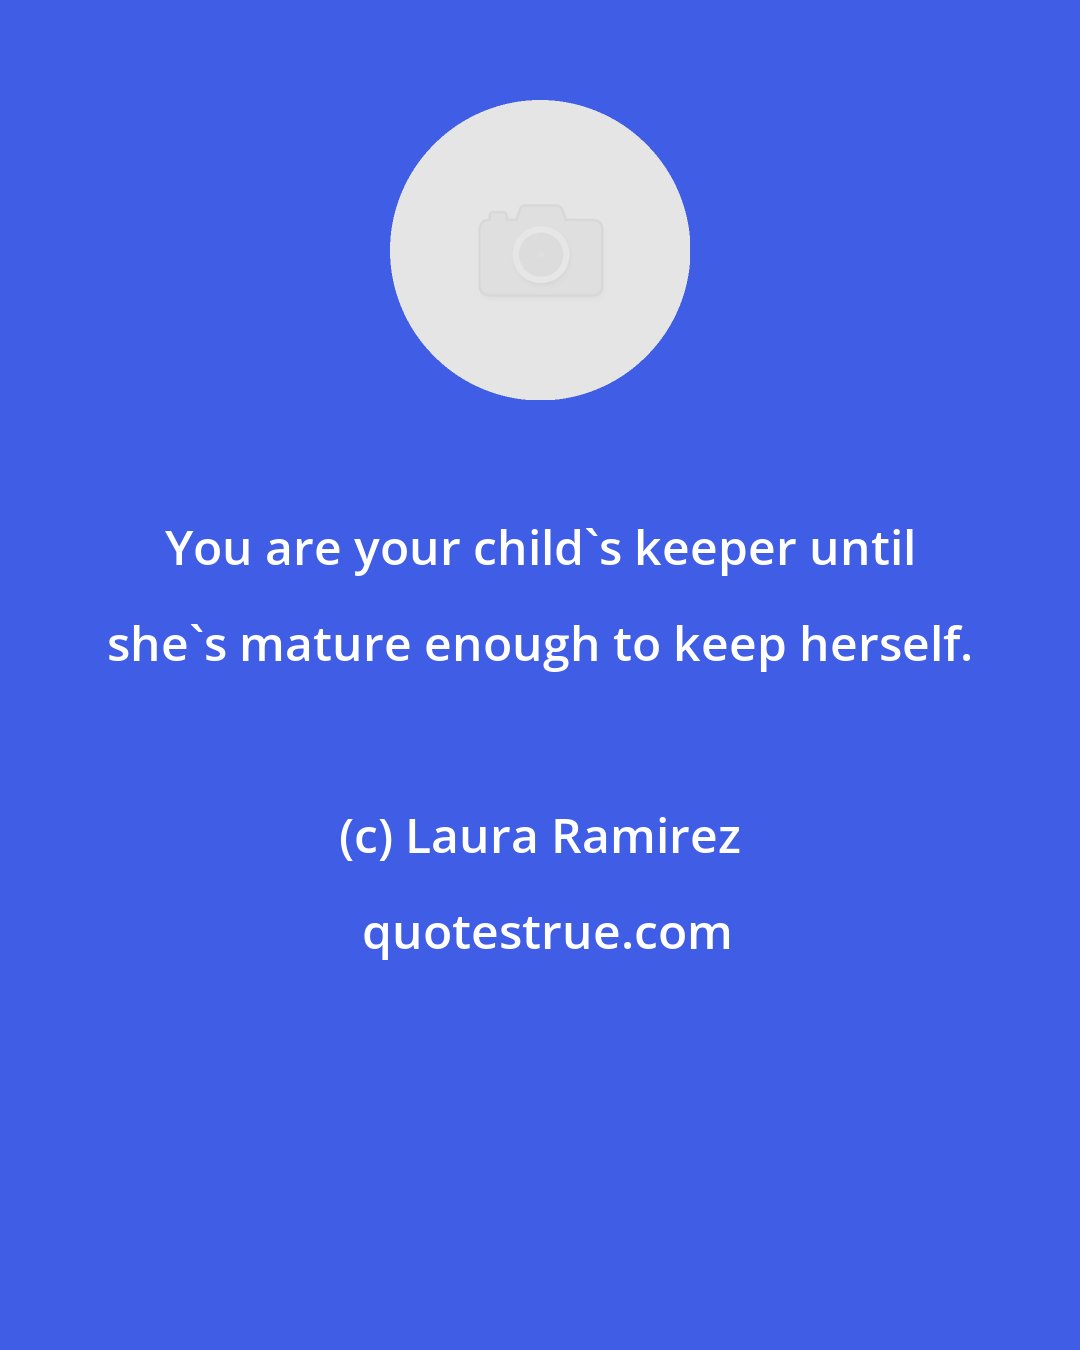 Laura Ramirez: You are your child's keeper until she's mature enough to keep herself.